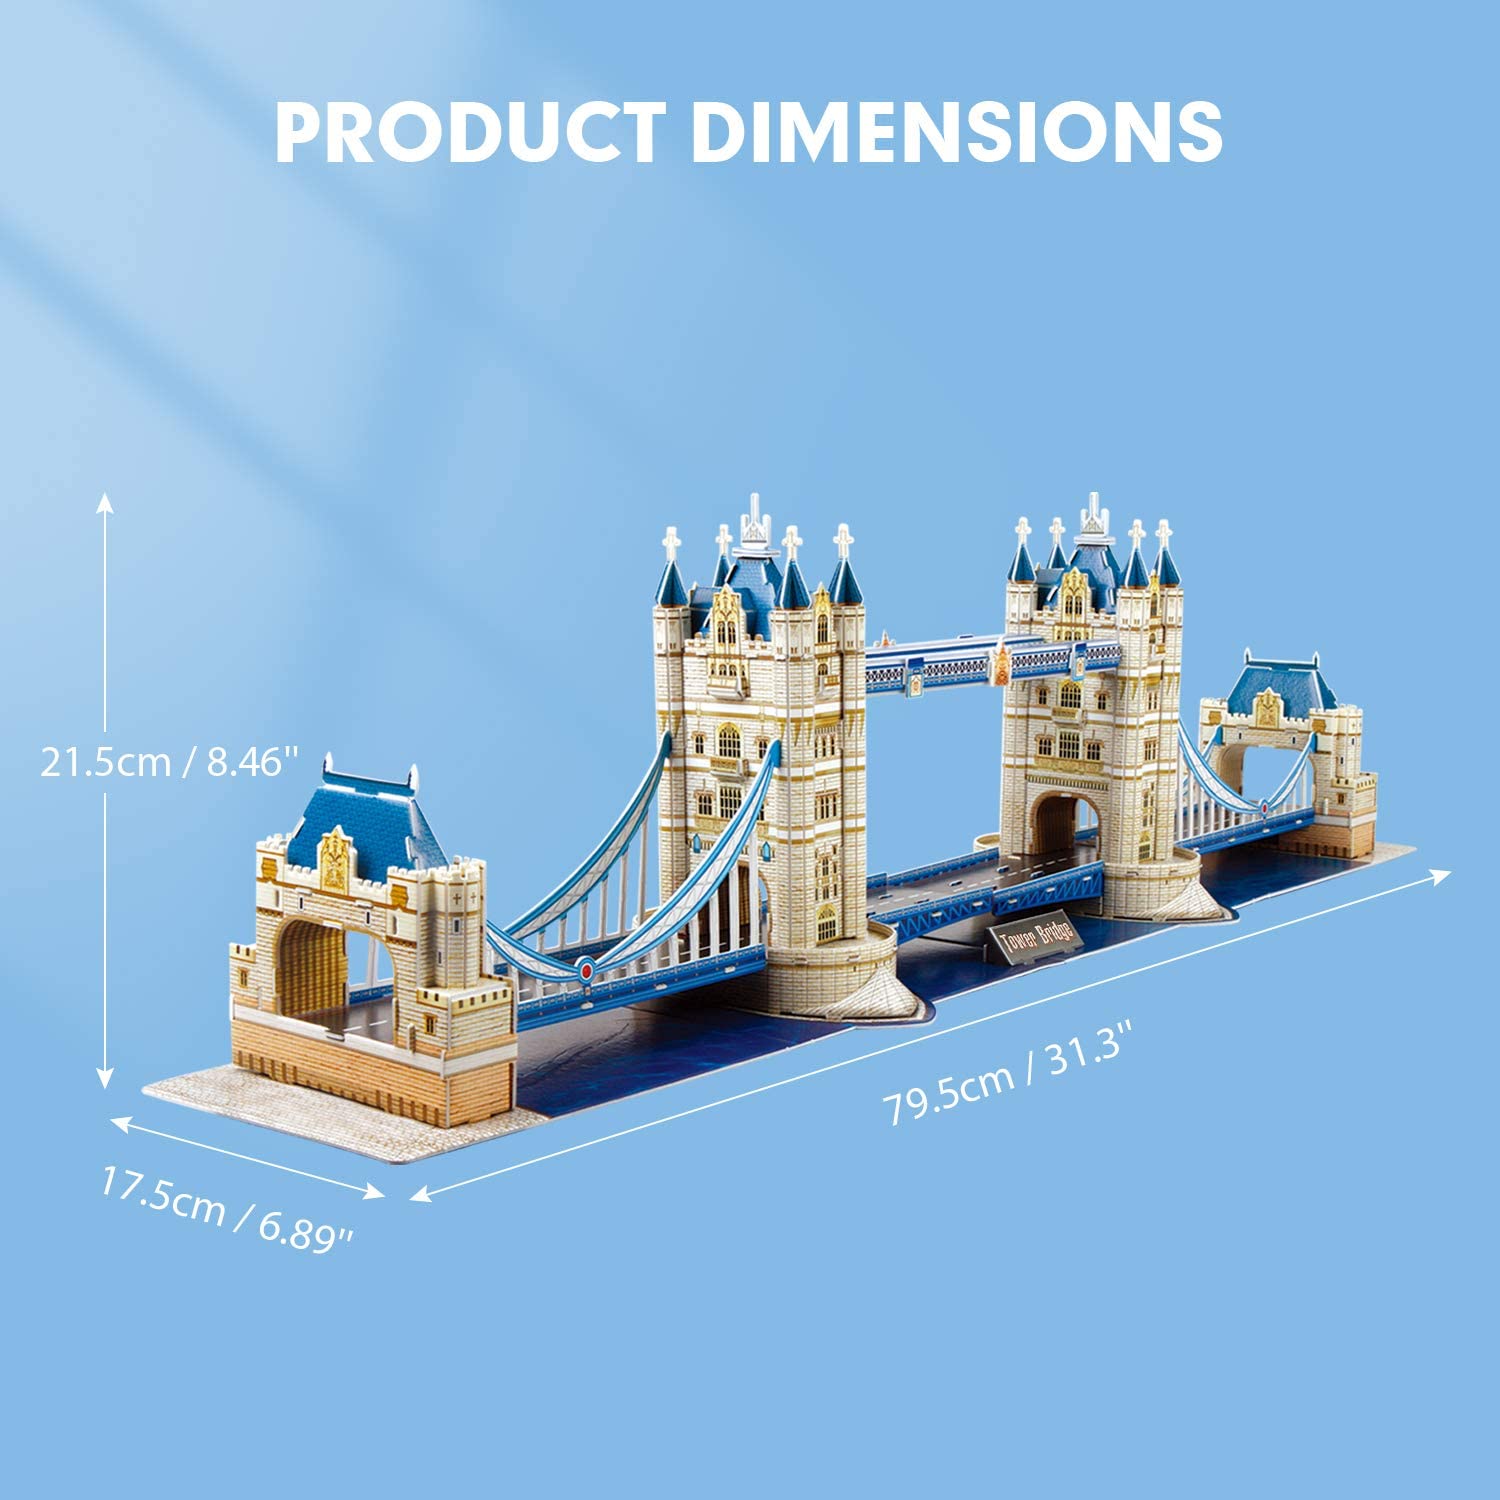 National Geographic Tower Bridge 3D Model product dimensions